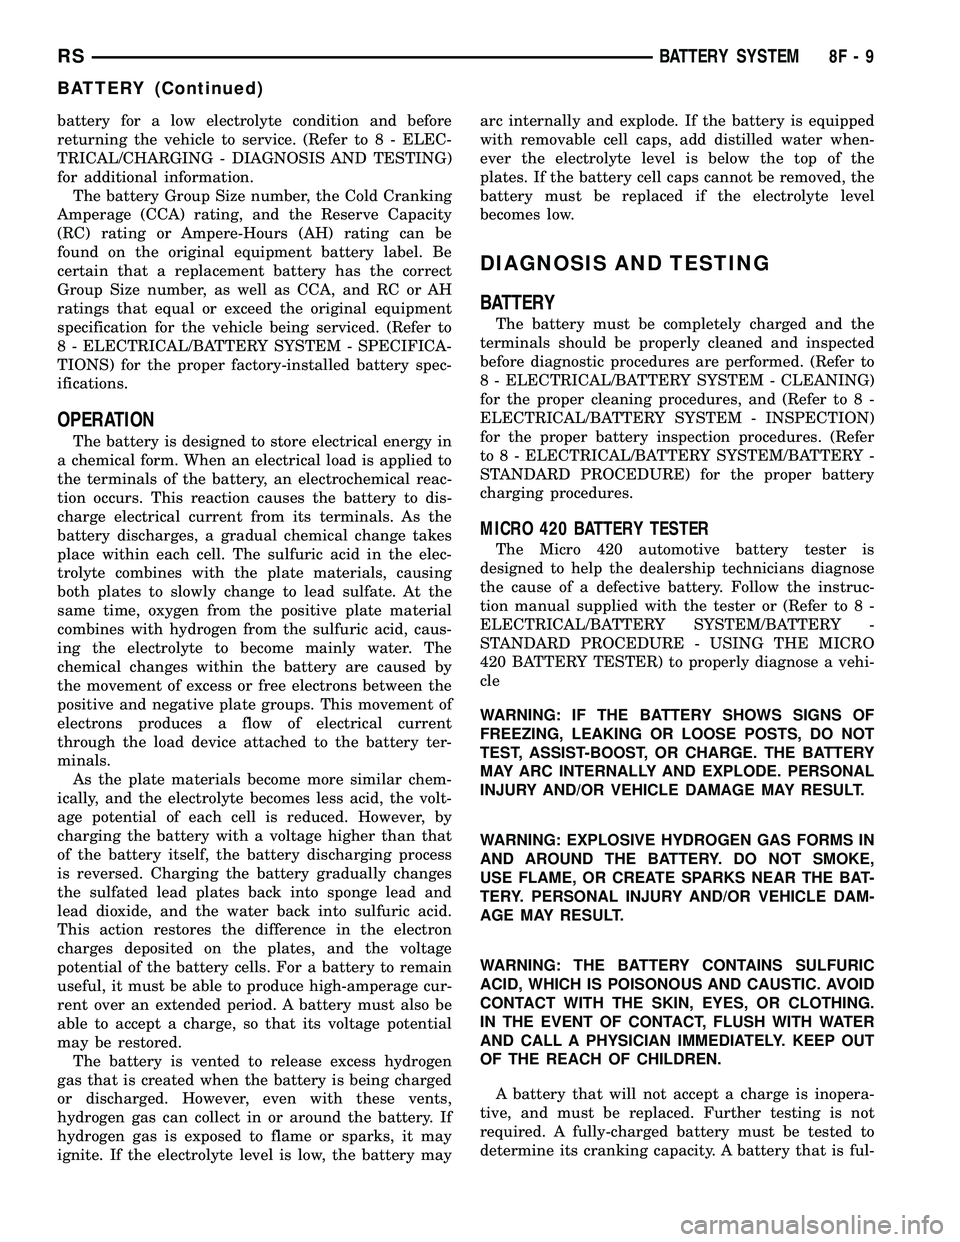 CHRYSLER VOYAGER 2005  Service Manual battery for a low electrolyte condition and before
returning the vehicle to service. (Refer to 8 - ELEC-
TRICAL/CHARGING - DIAGNOSIS AND TESTING)
for additional information.
The battery Group Size num